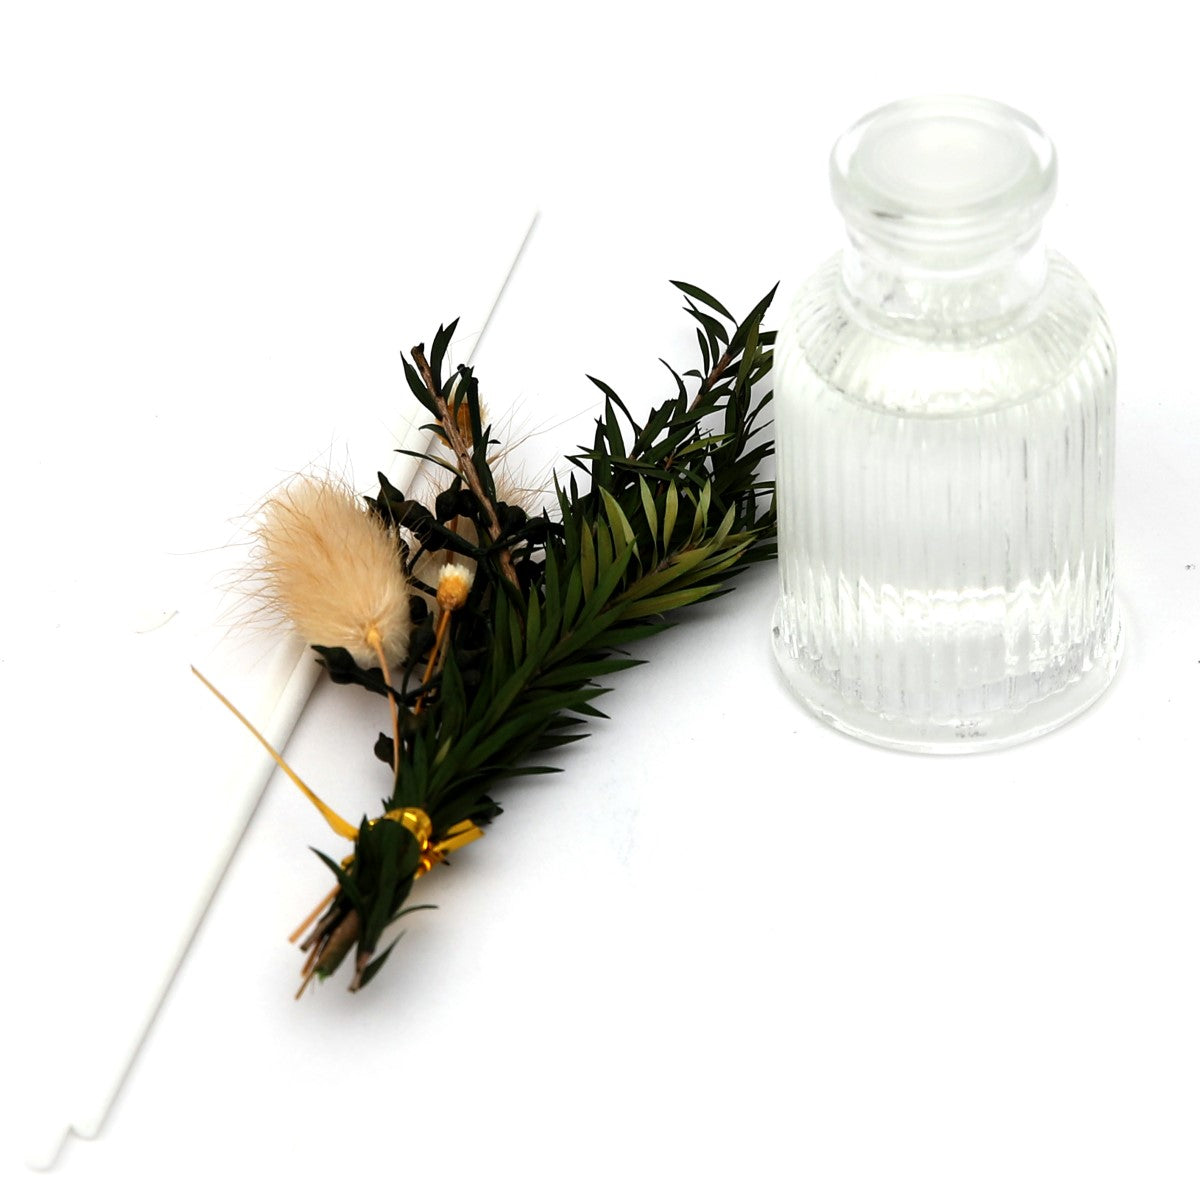 REED DIFFUSERS.Z237-553